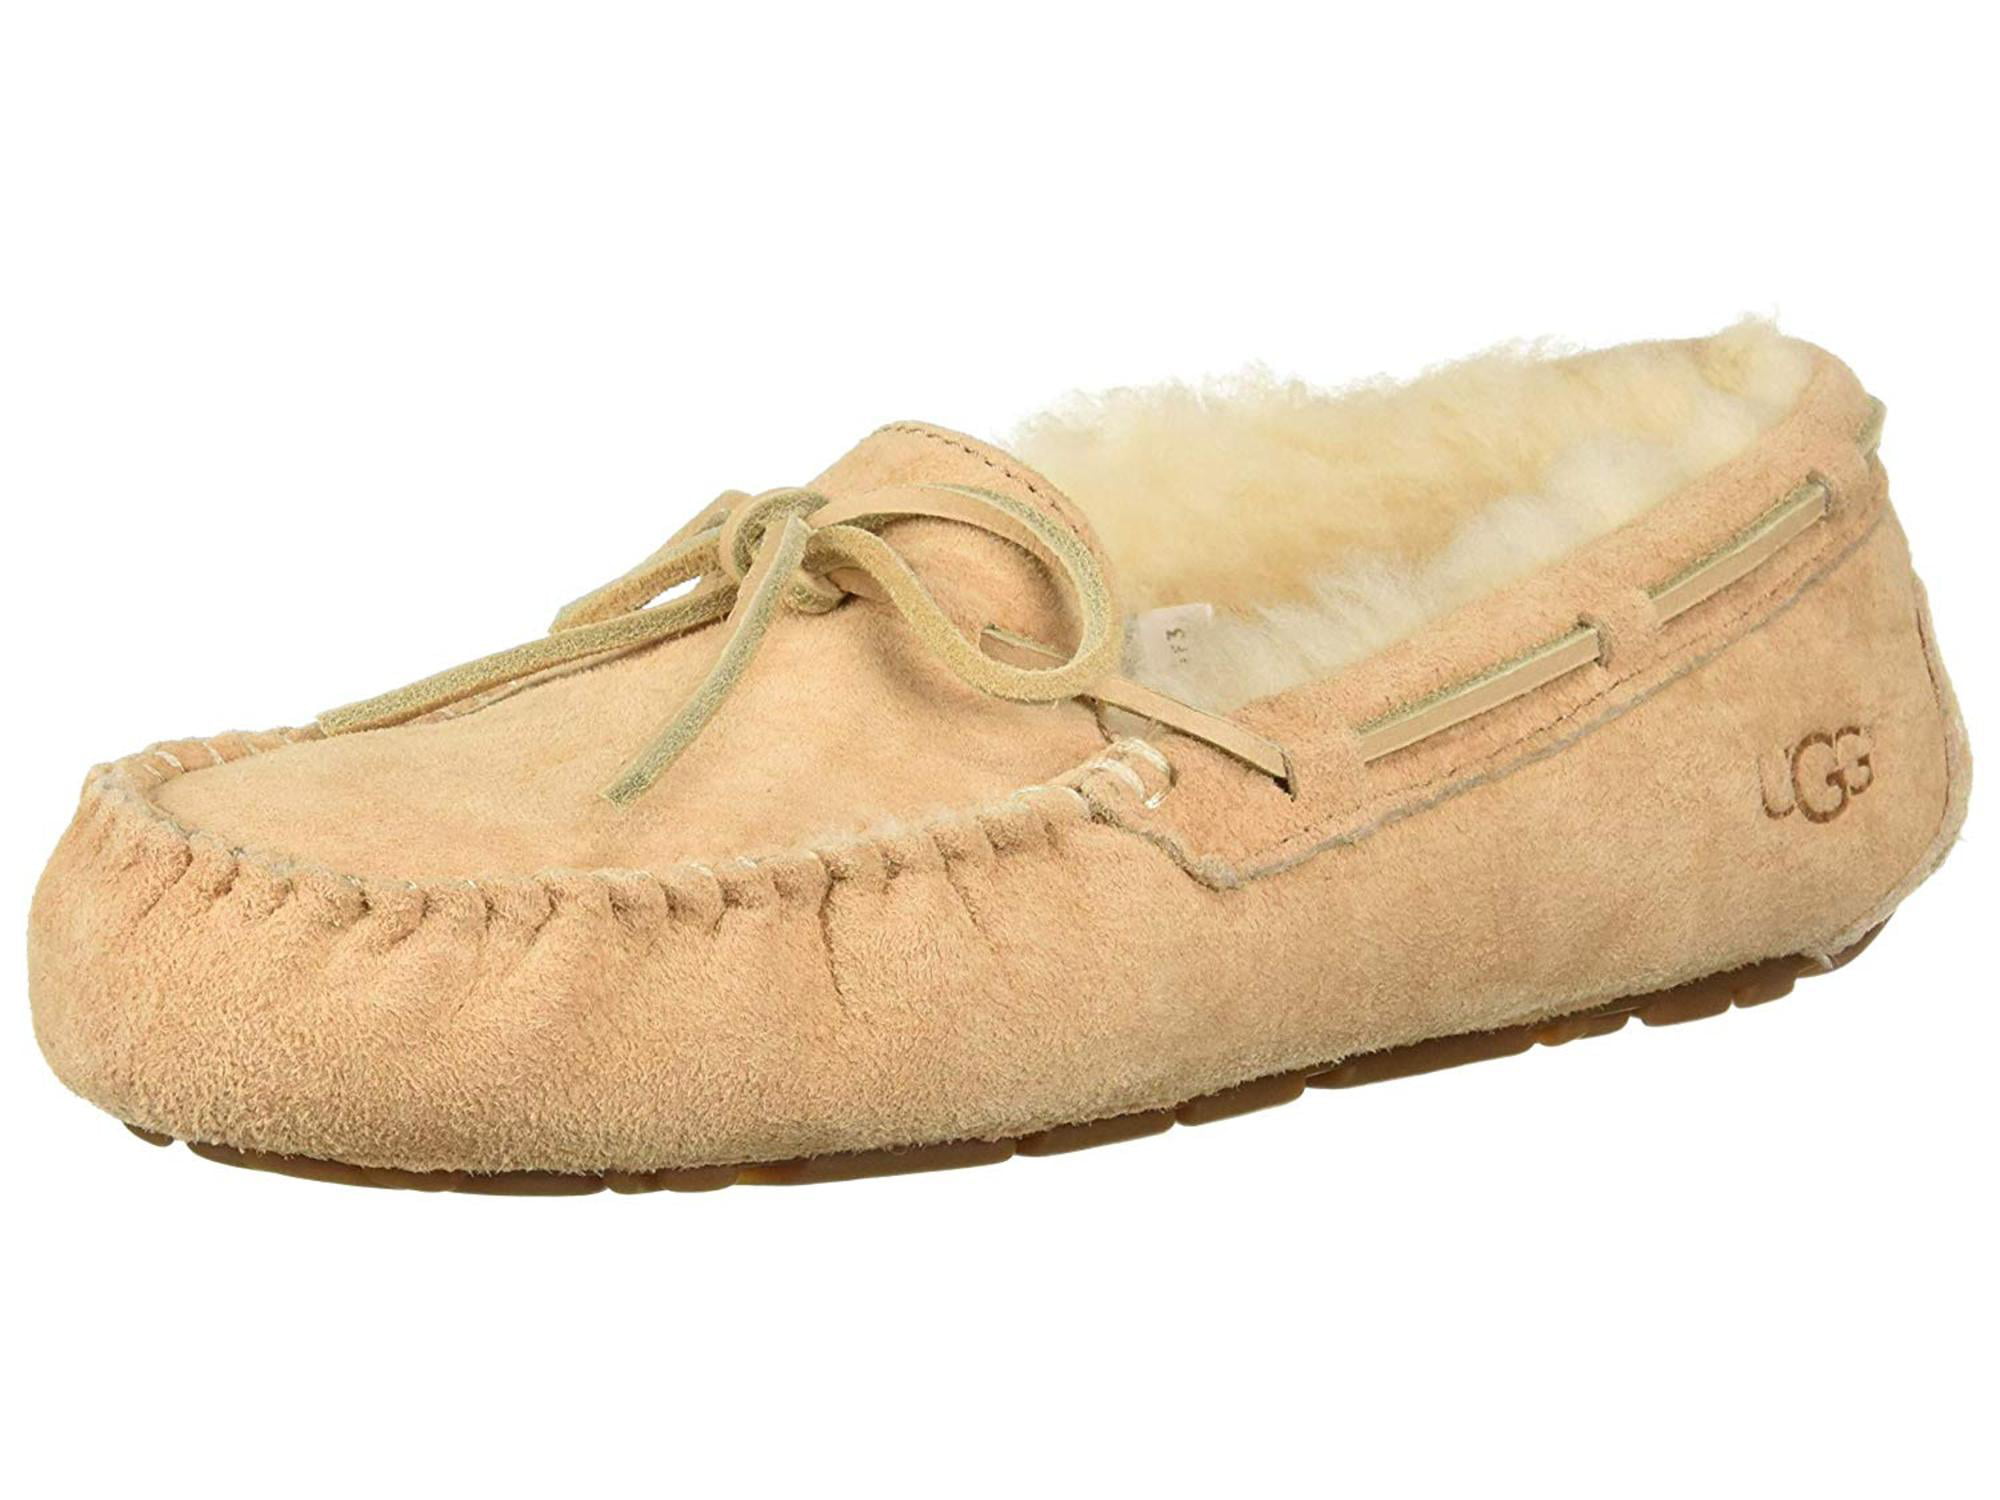 ugg slippers on sale canada 